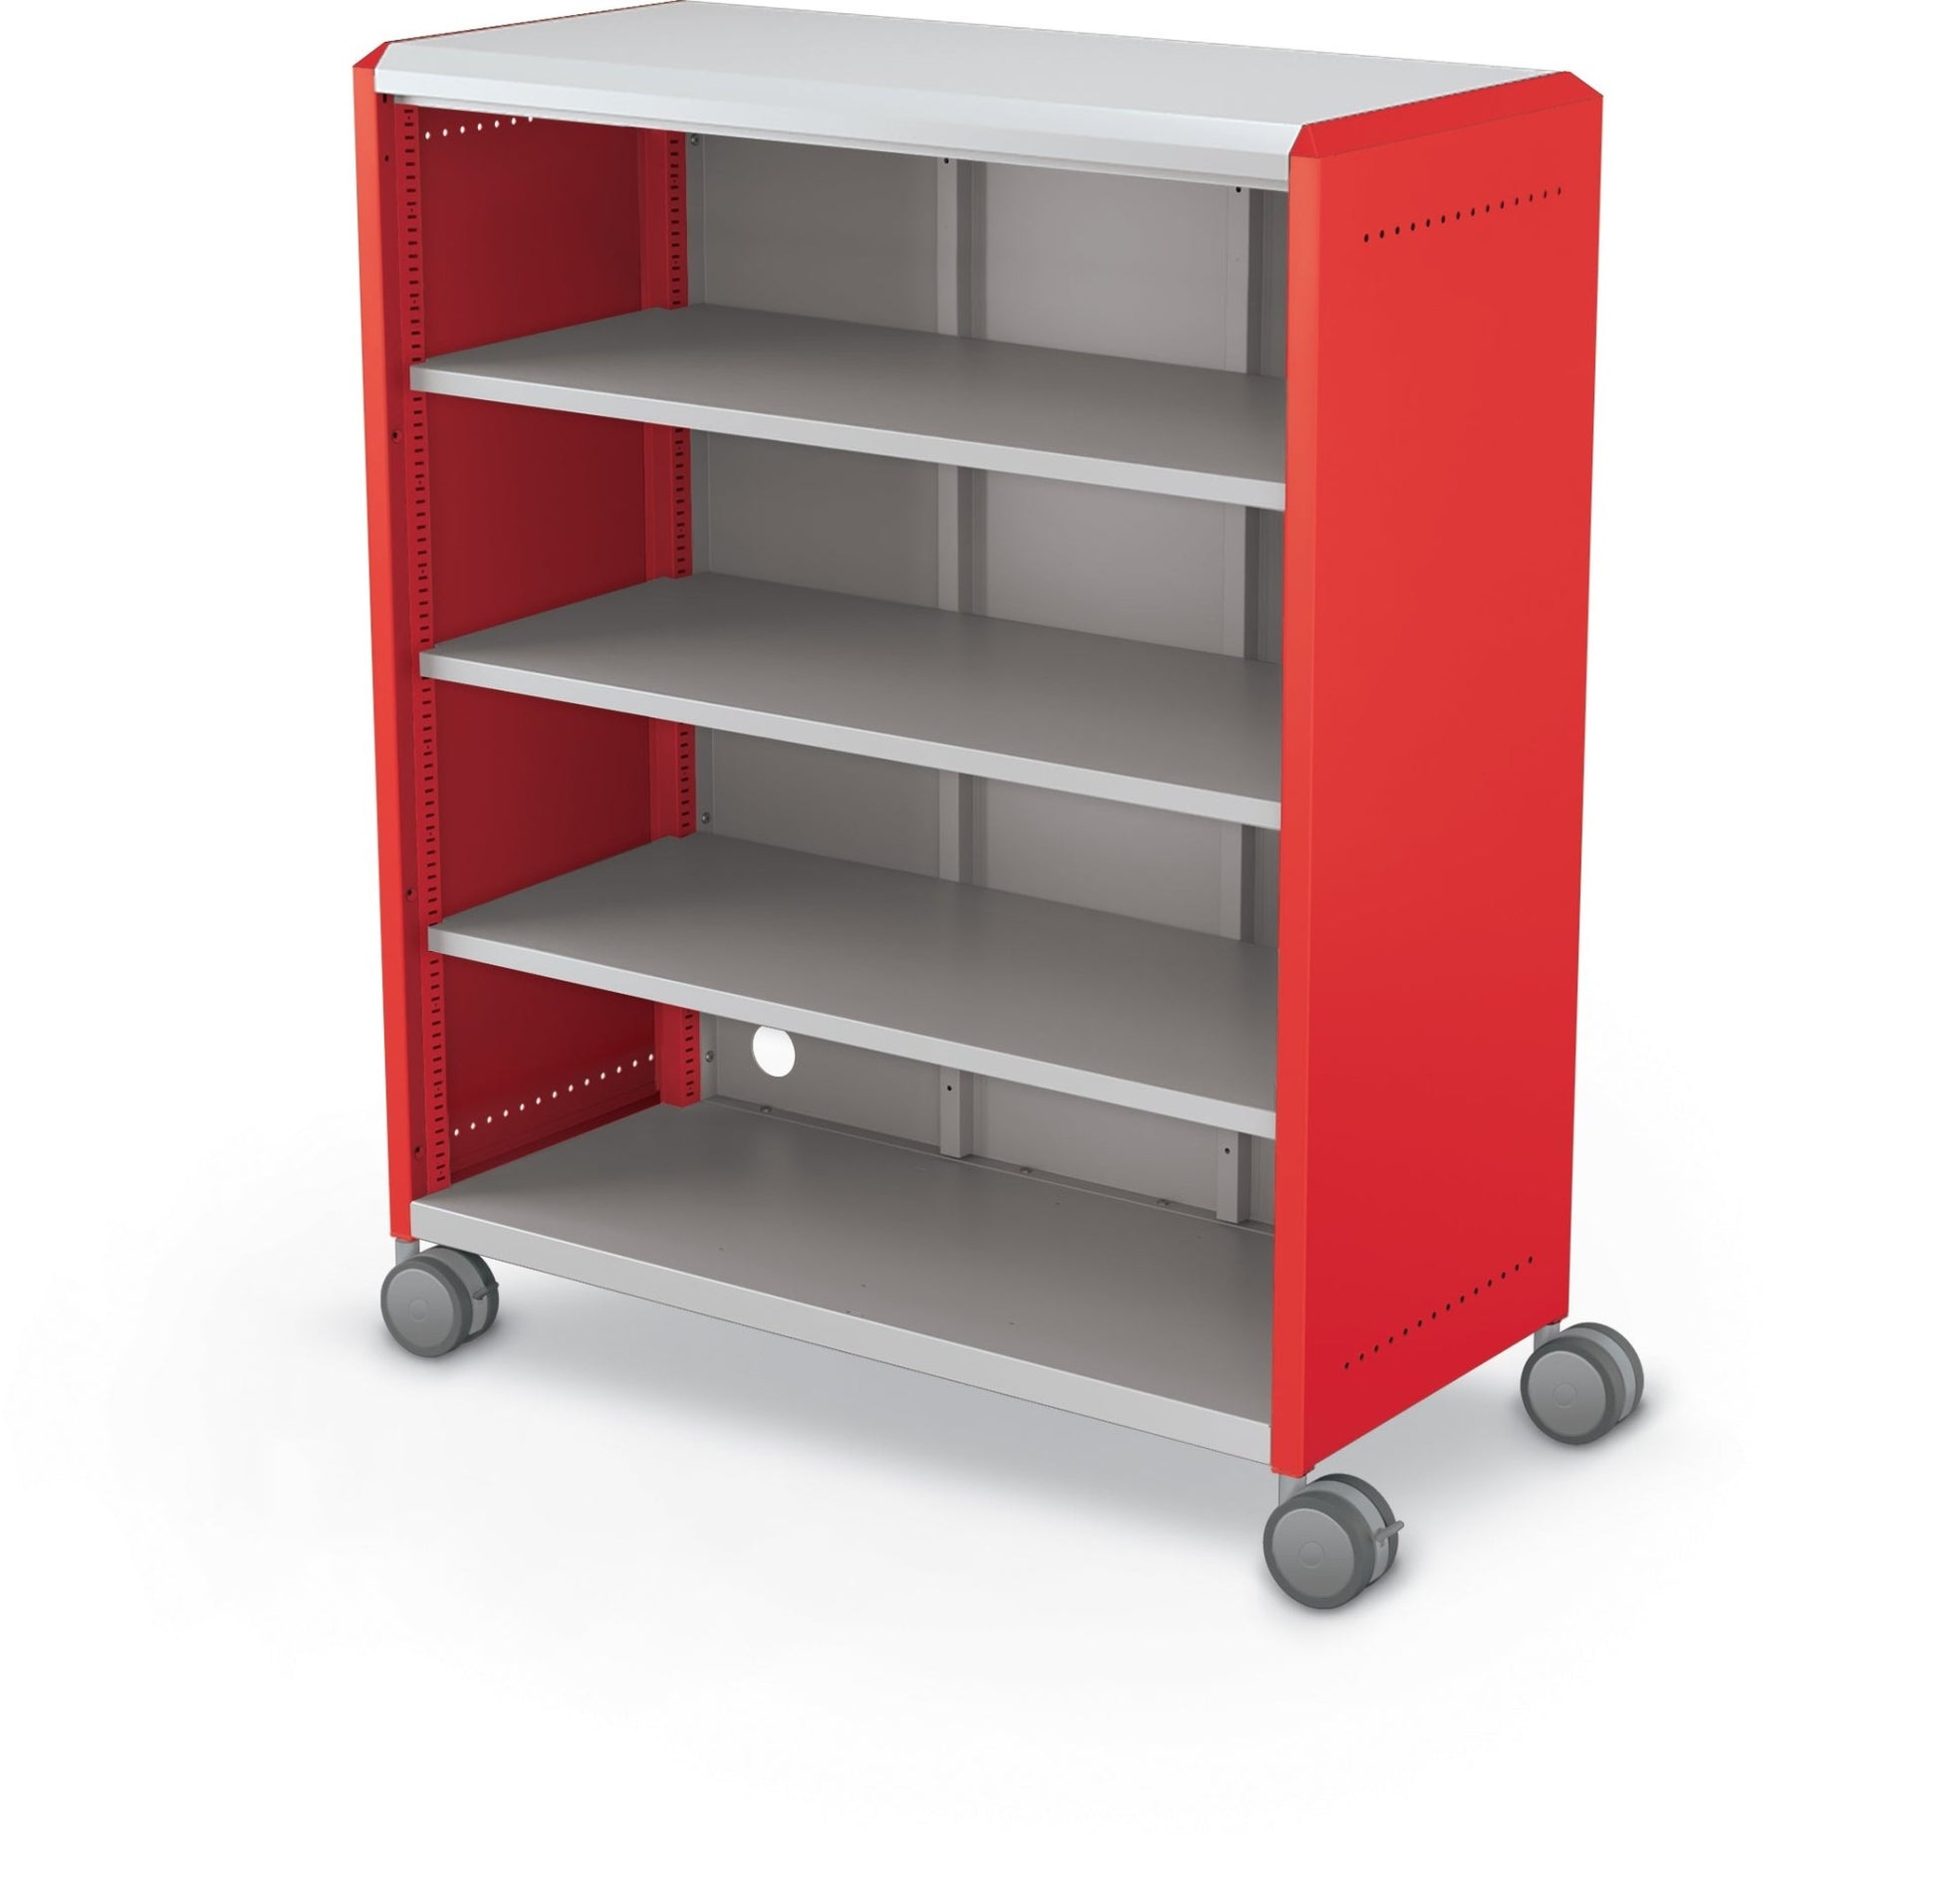 Mooreco Compass Cabinet Maxi H3 - Standard Back and Side Panels - No Doors with Shelves and Casters (MOR-C3A1X1D1X0) - SchoolOutlet